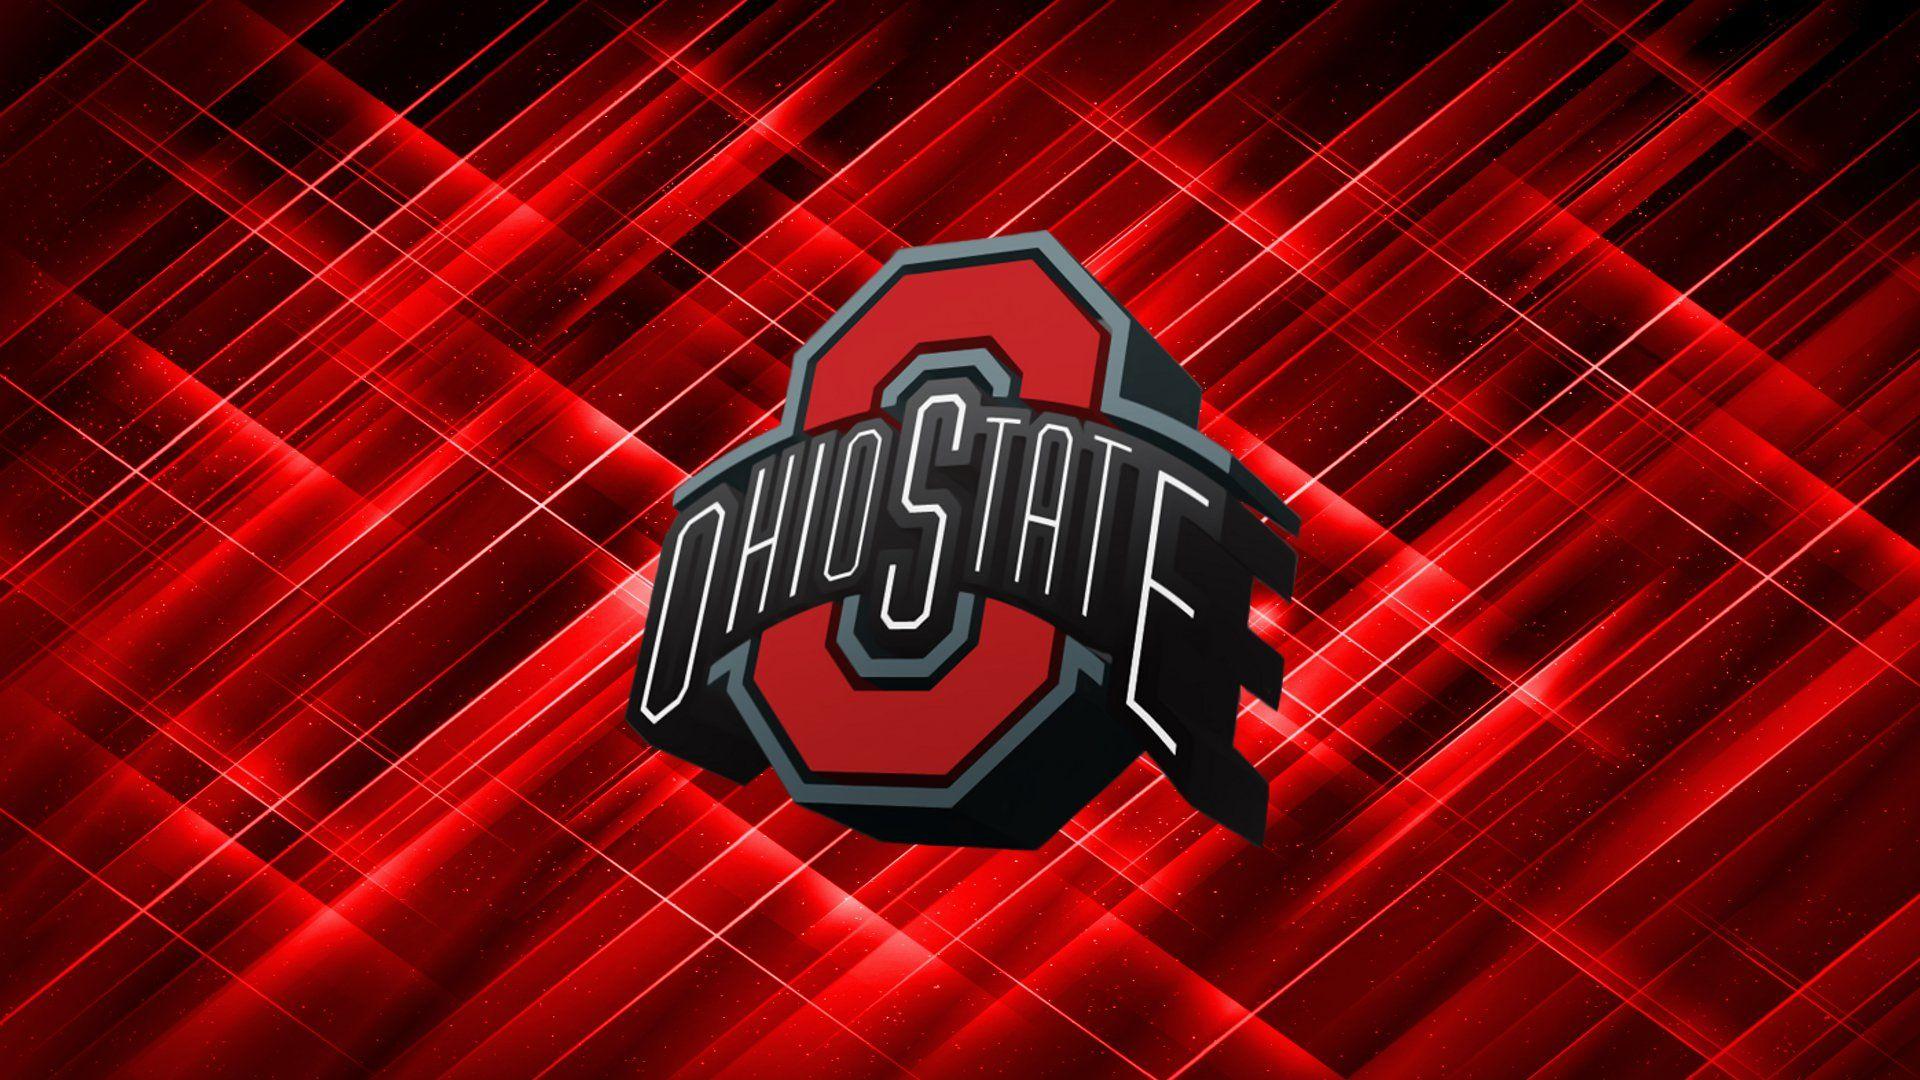 Ohio State University Wallpapers - Wallpaper Cave